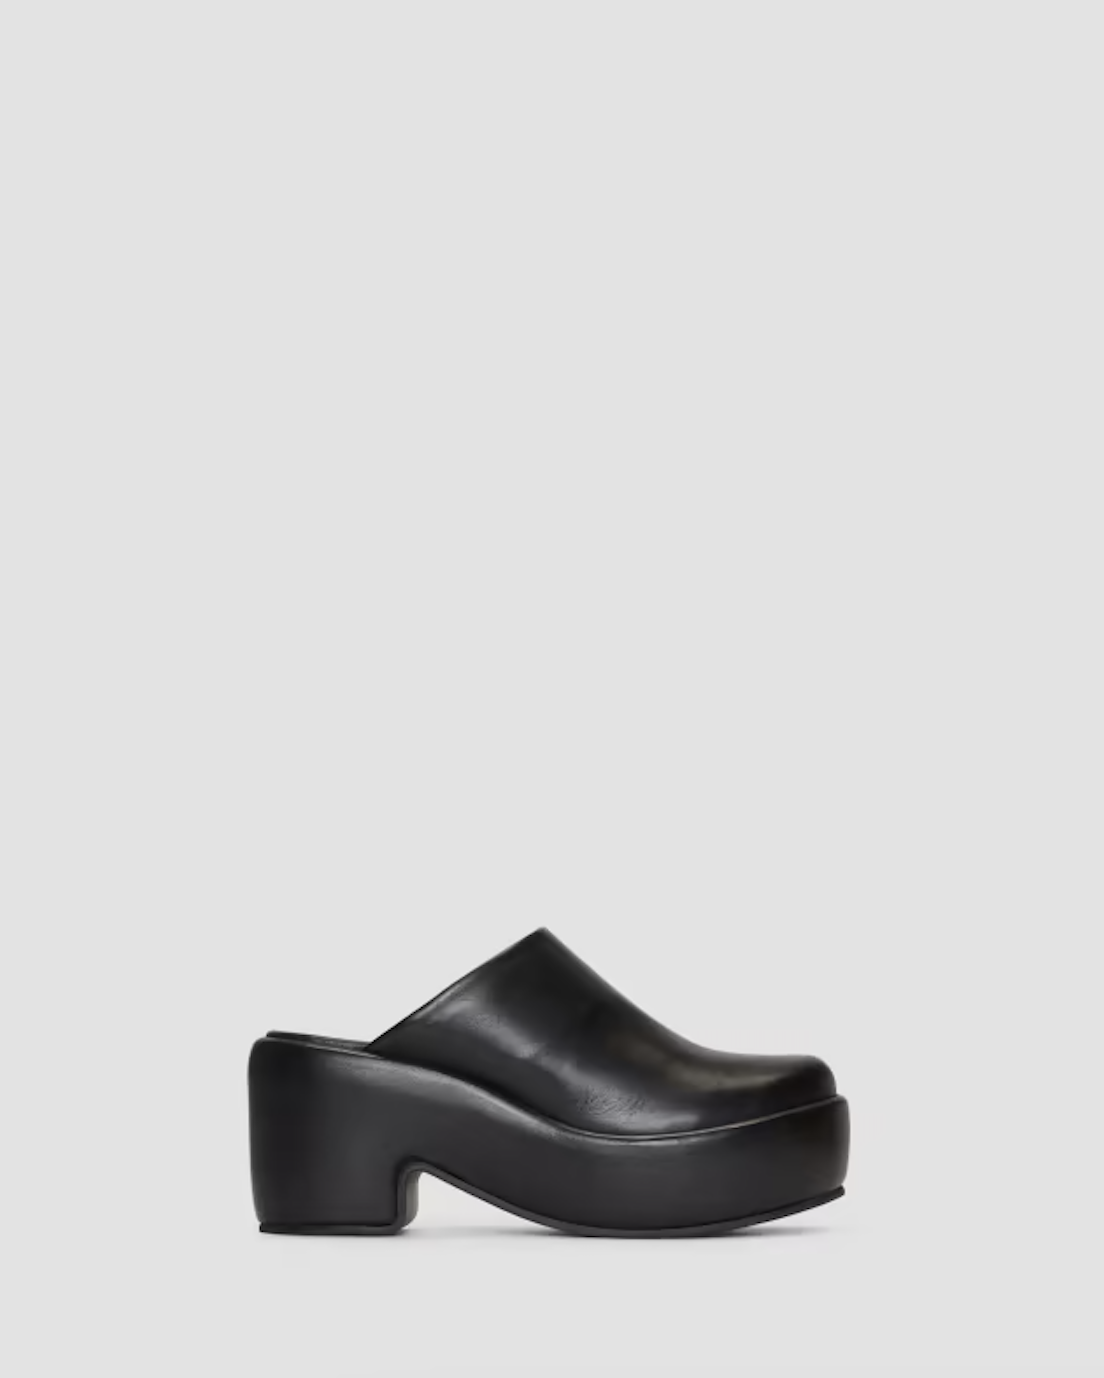 black everlane puffa clog mules with arch support